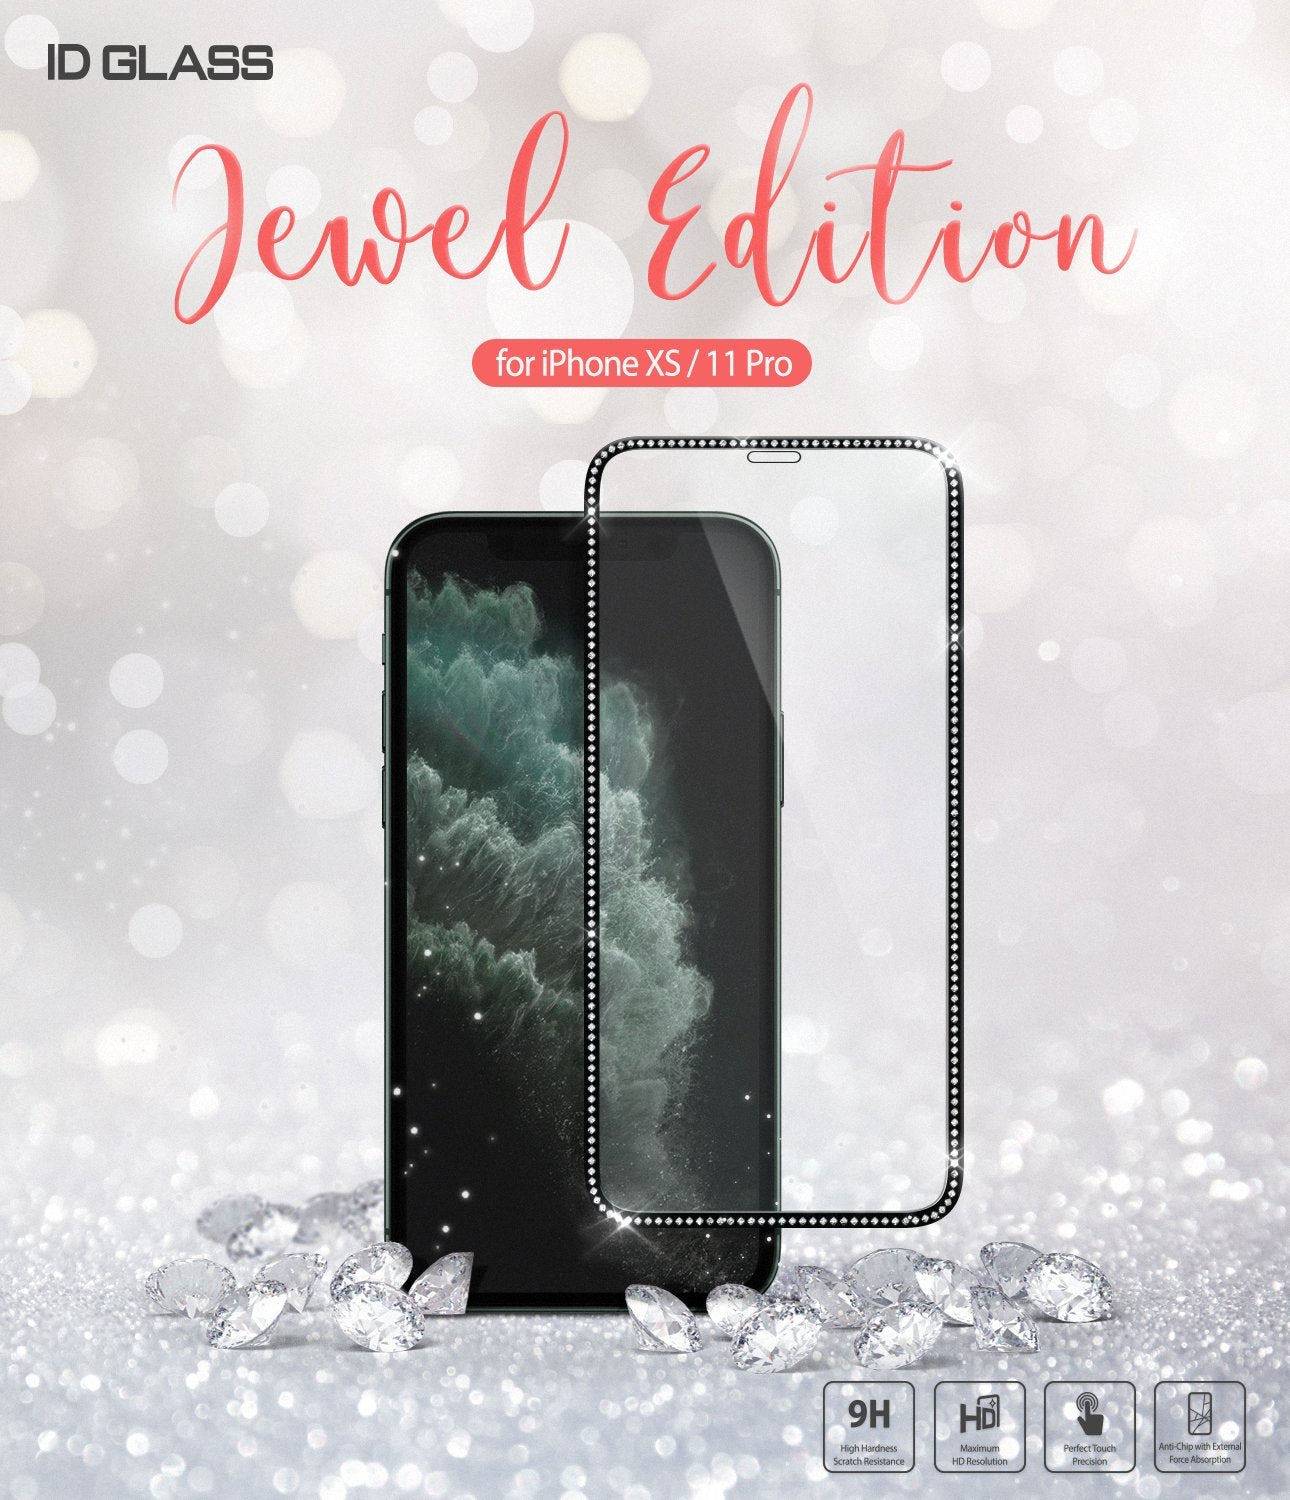 ringke invisible defender for iphone xs 11 pro tempered glass screen protector jewel edition main